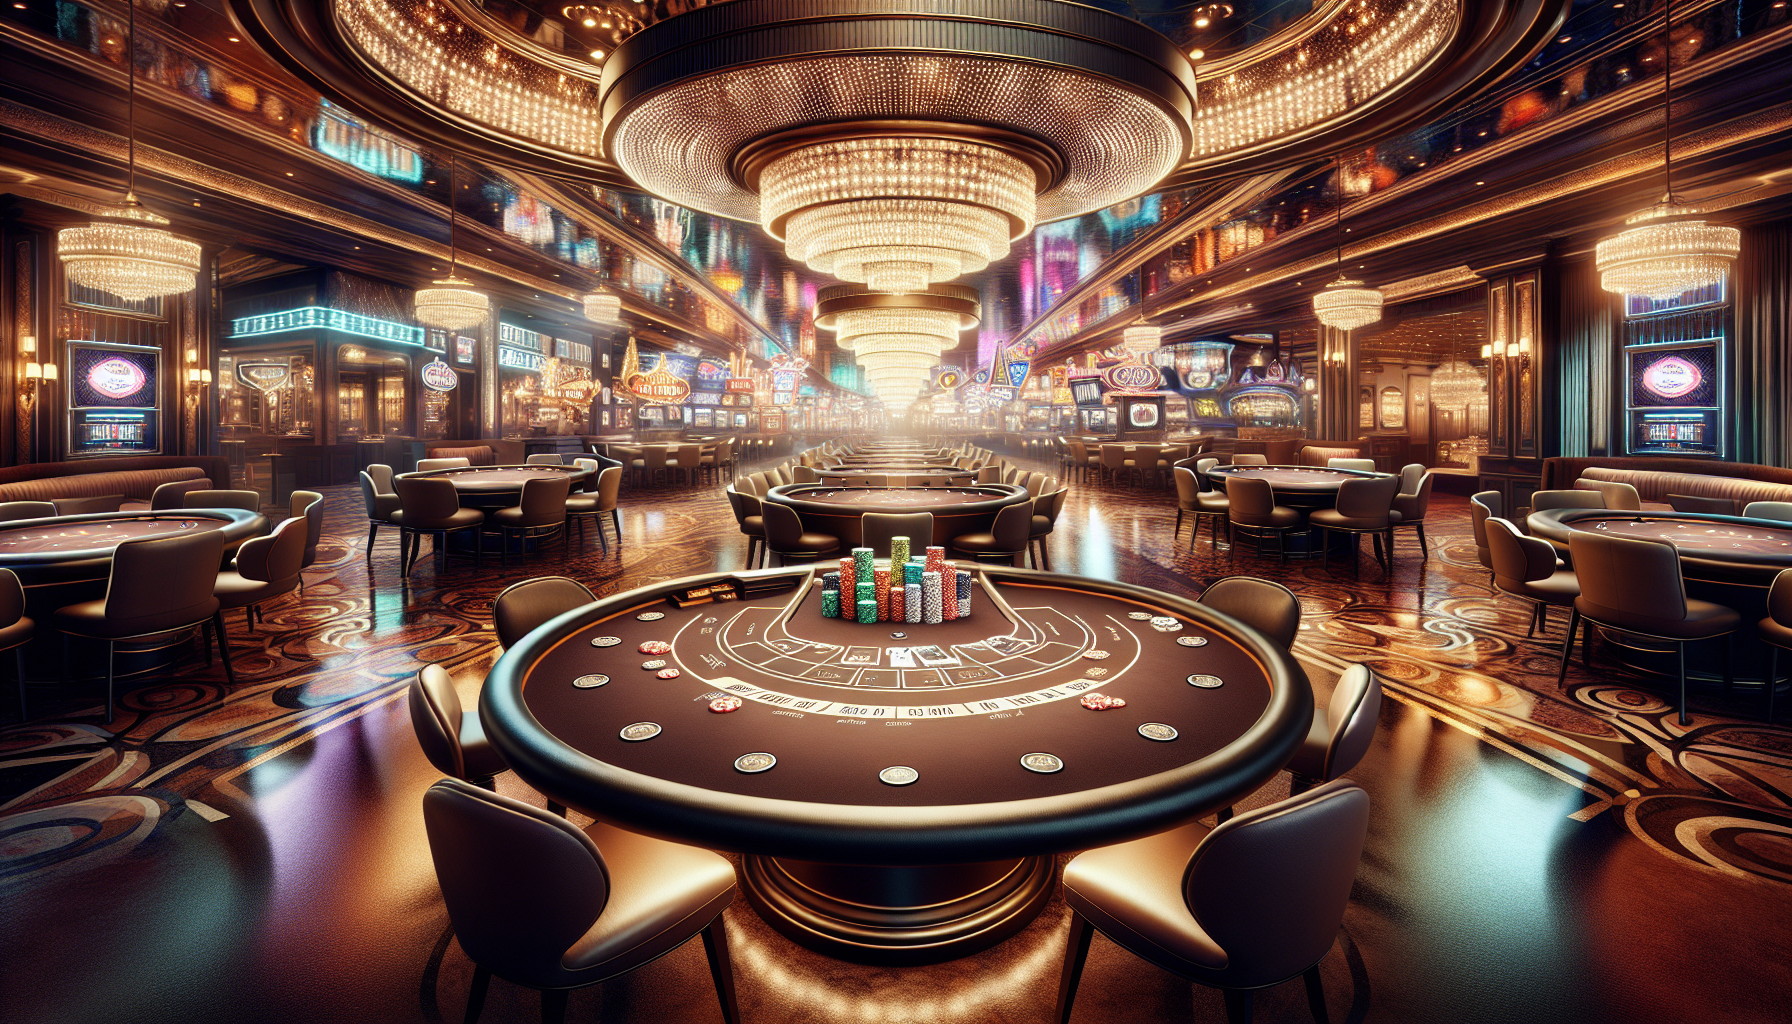 How Can I Find Casinos With High-stakes Poker Games In Las Vegas?